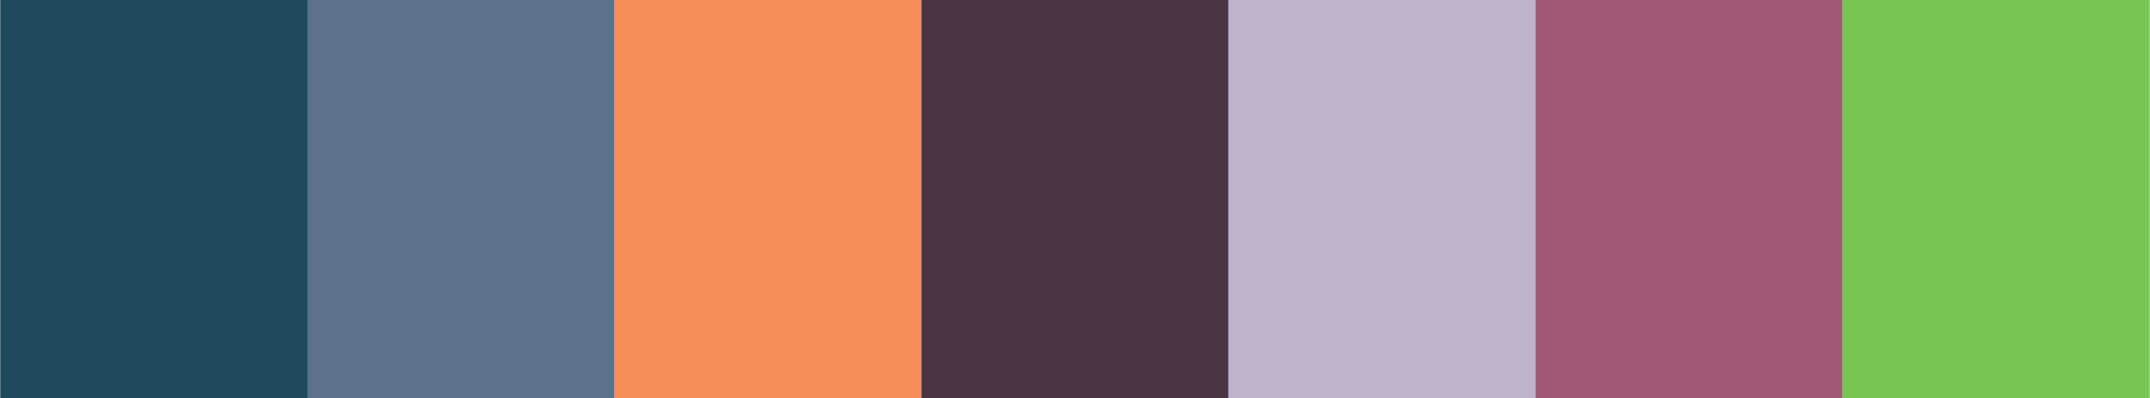 Collection-palette